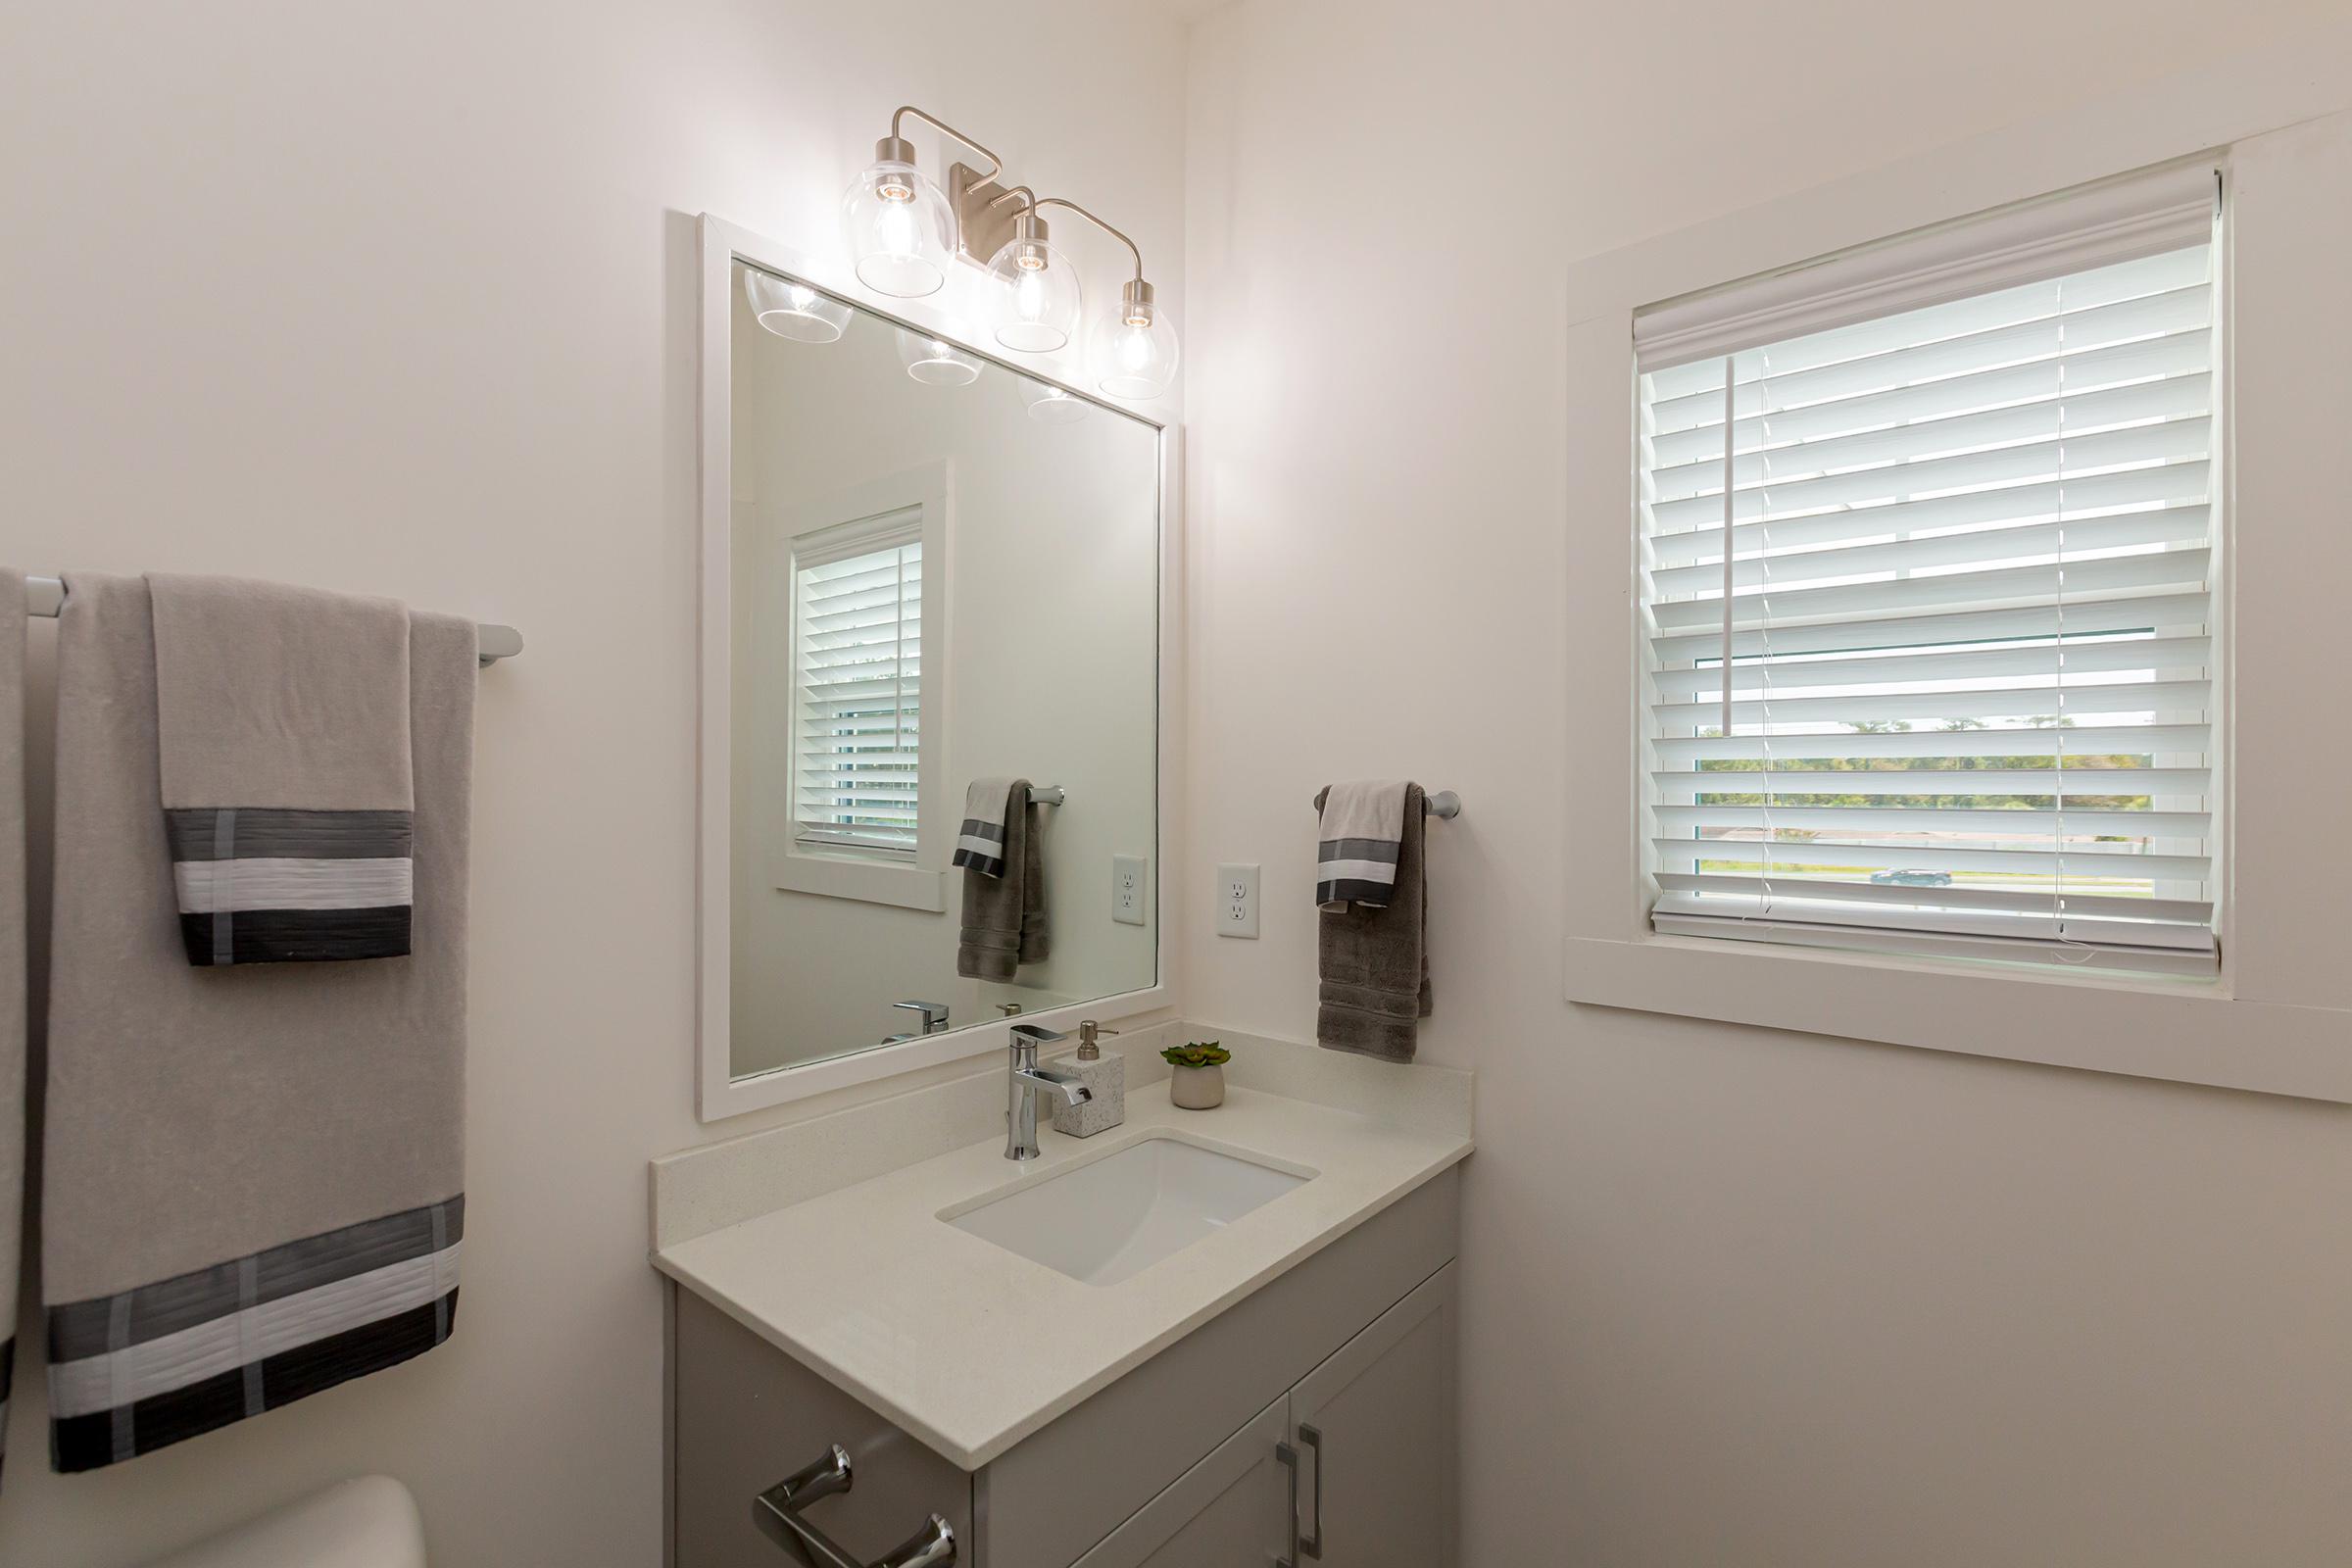 CHROME FIXTURES AND 2-INCH BLINDS